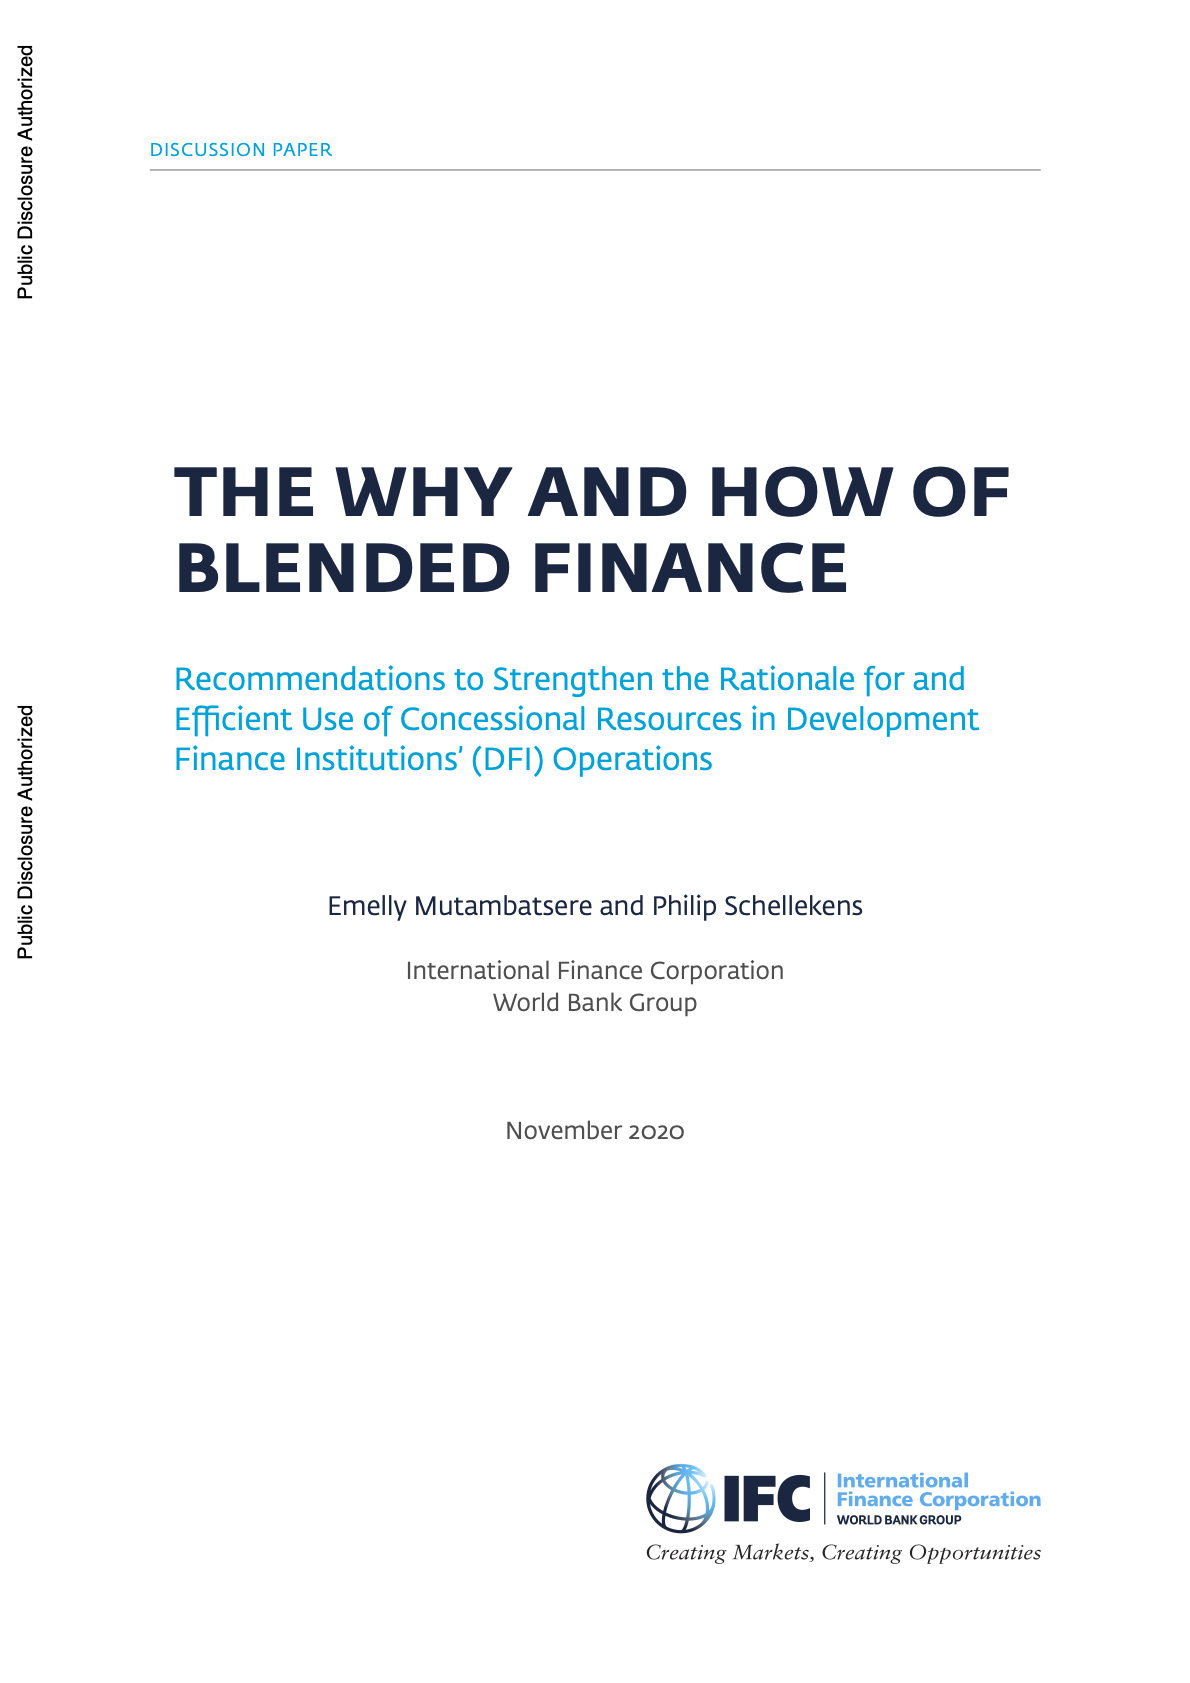 The Why and How of Blended Finance